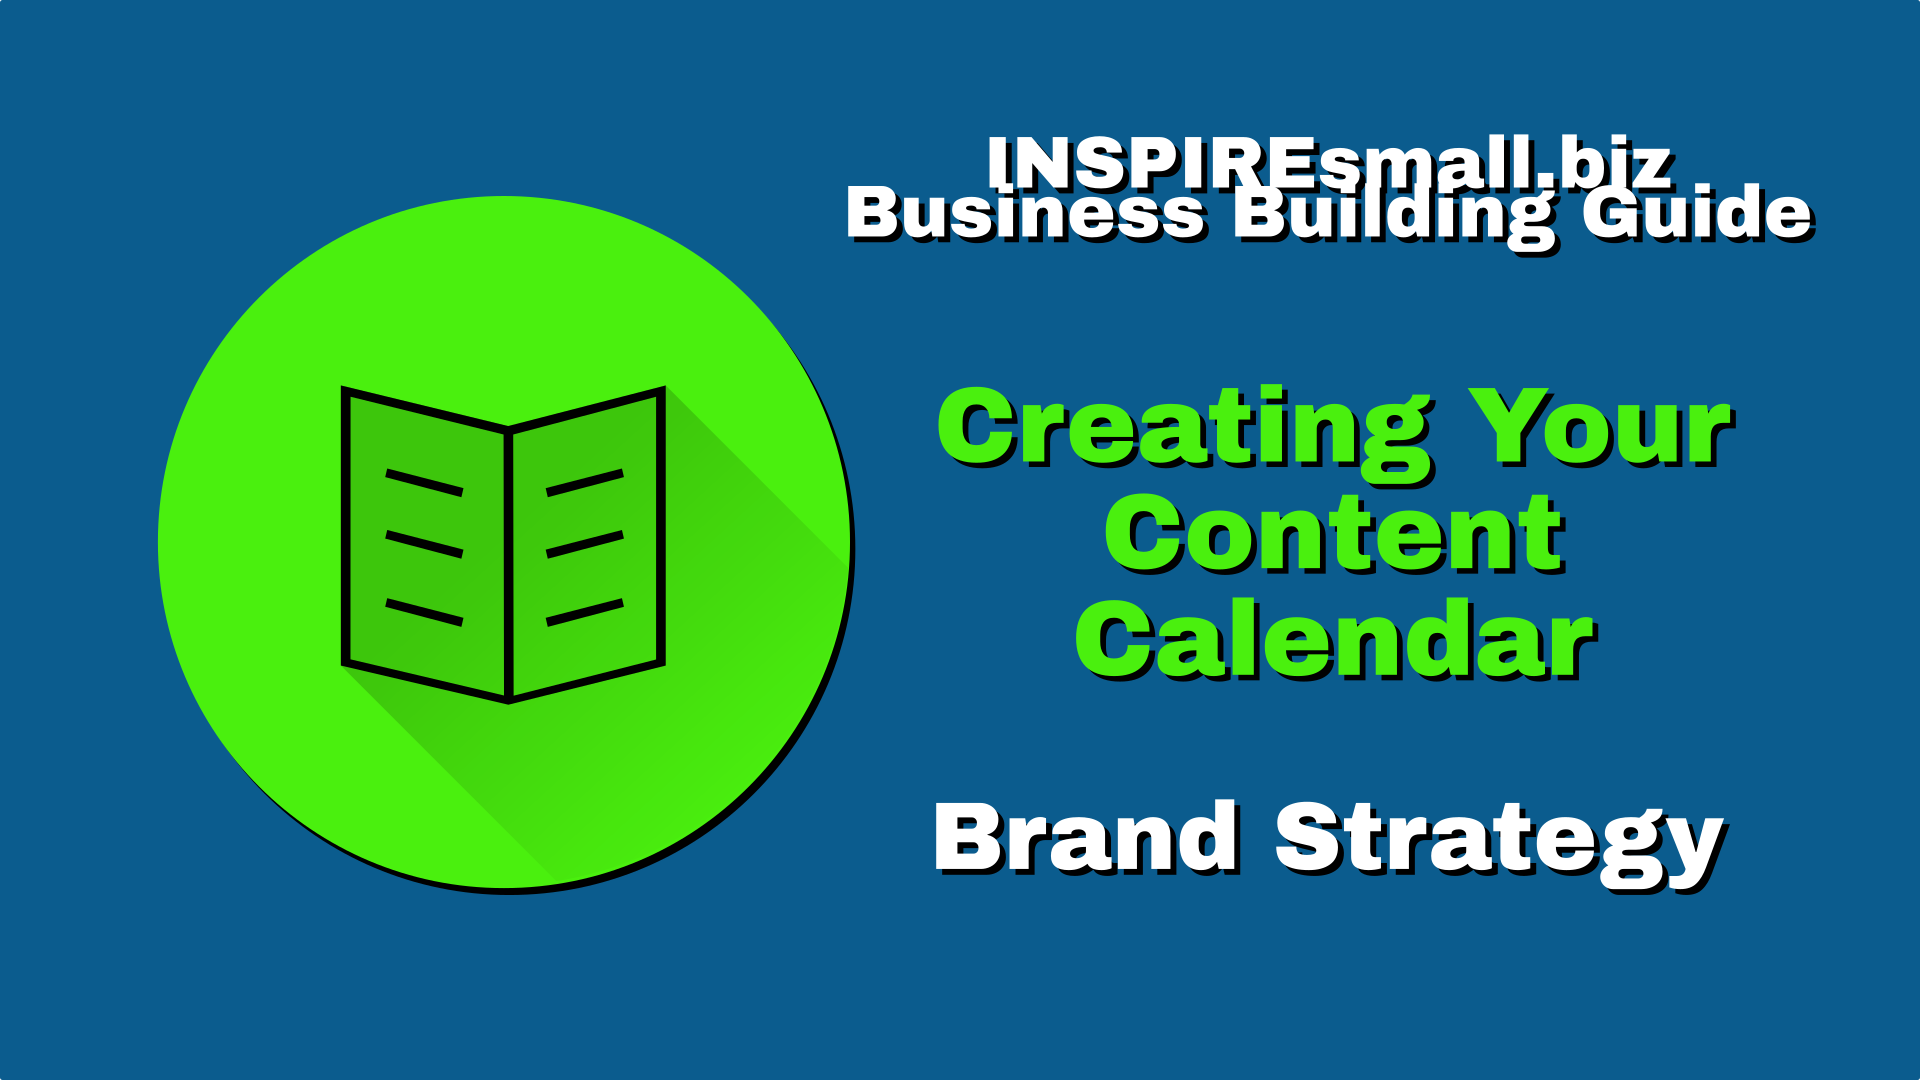 INSPIREsmall.biz Business Building Guide - Brand Strategy Section - Creating Your Content Calendar